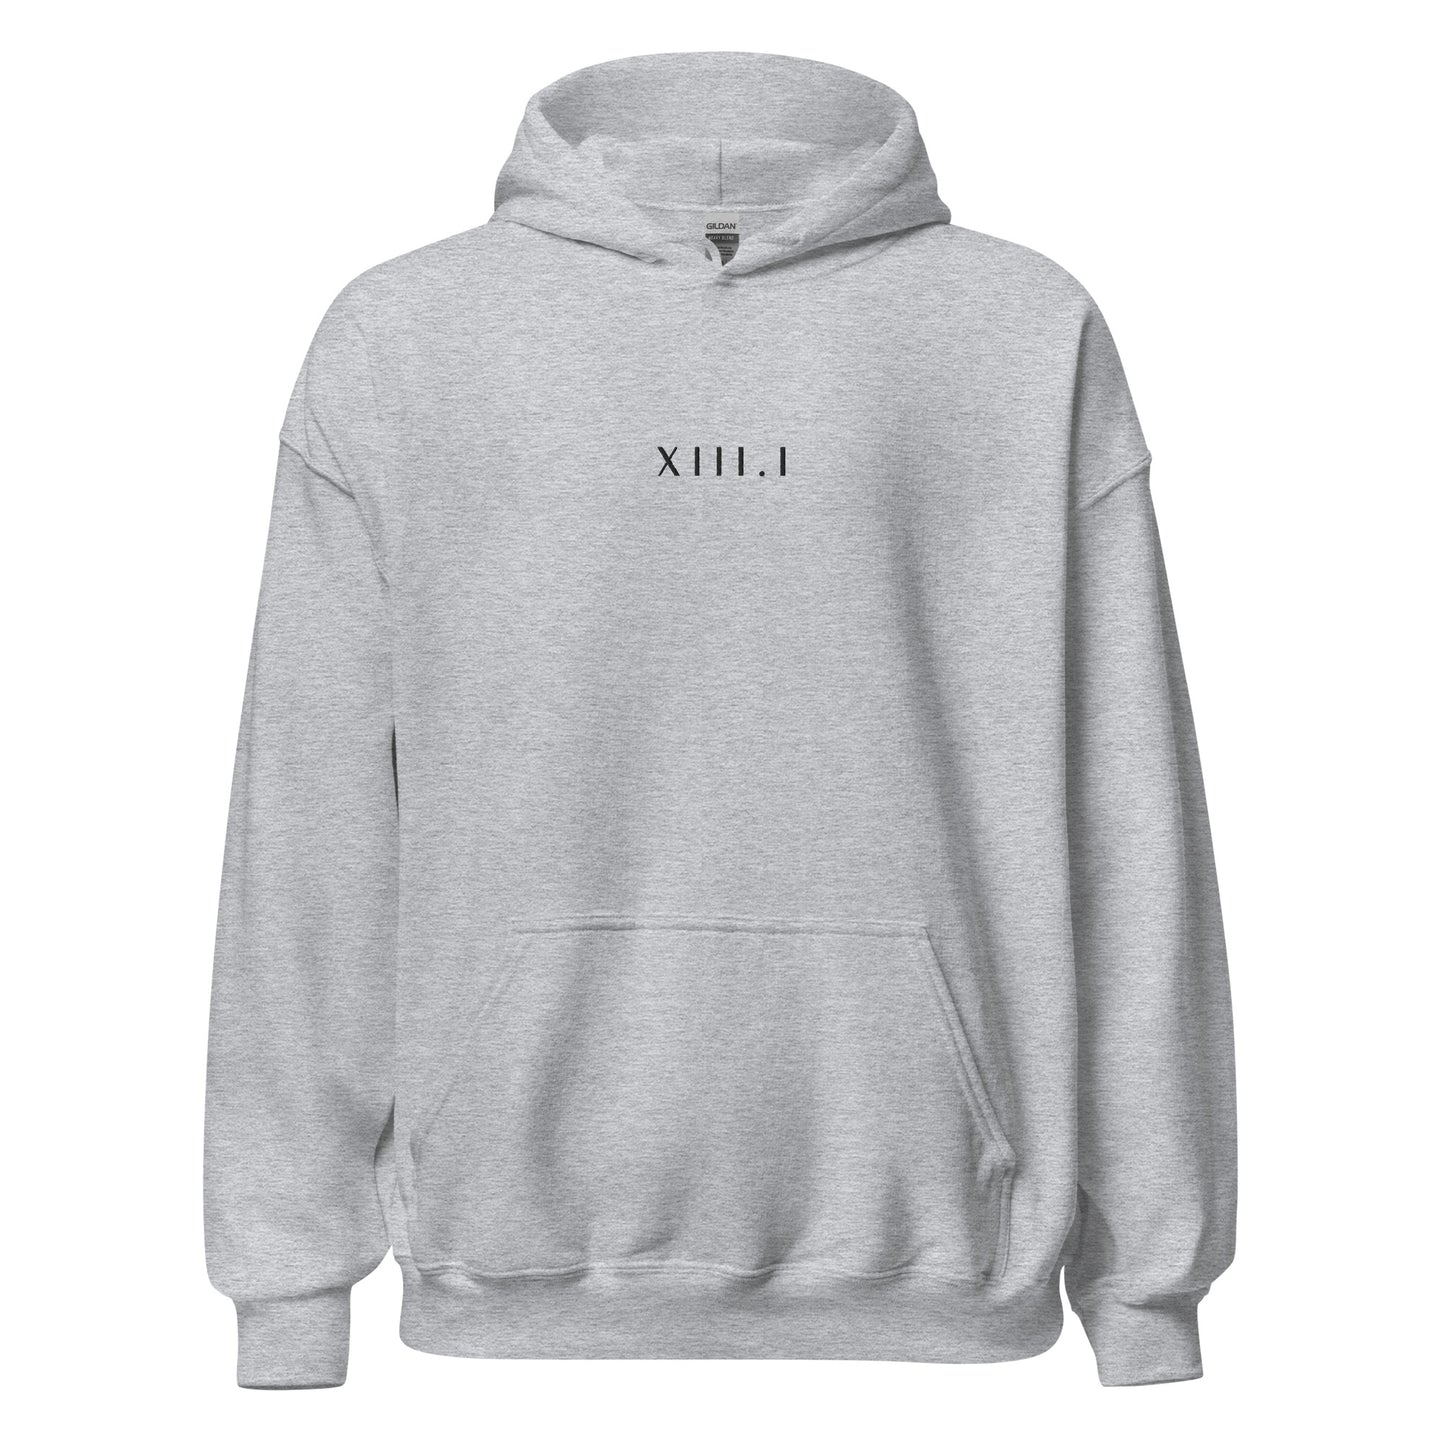 light grey unisex hoodie with XIII.I 13.1 half marathon in roman numerals embroidered in black writing